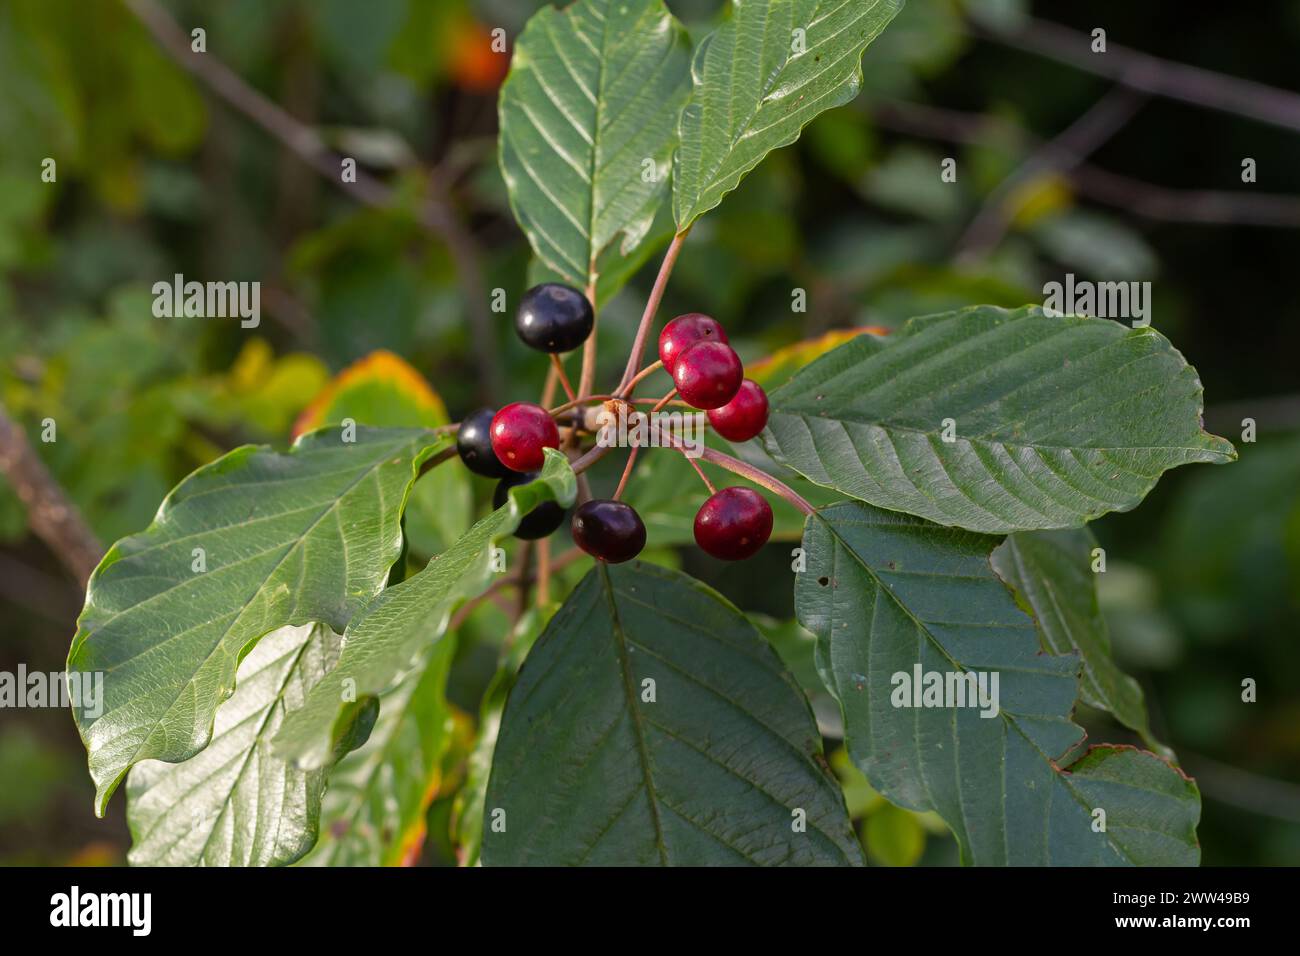 Leaves and fruits of the medicinal shrub Frangula alnus, Rhamnus frangula with poisonous black and red berries closeup. Stock Photo